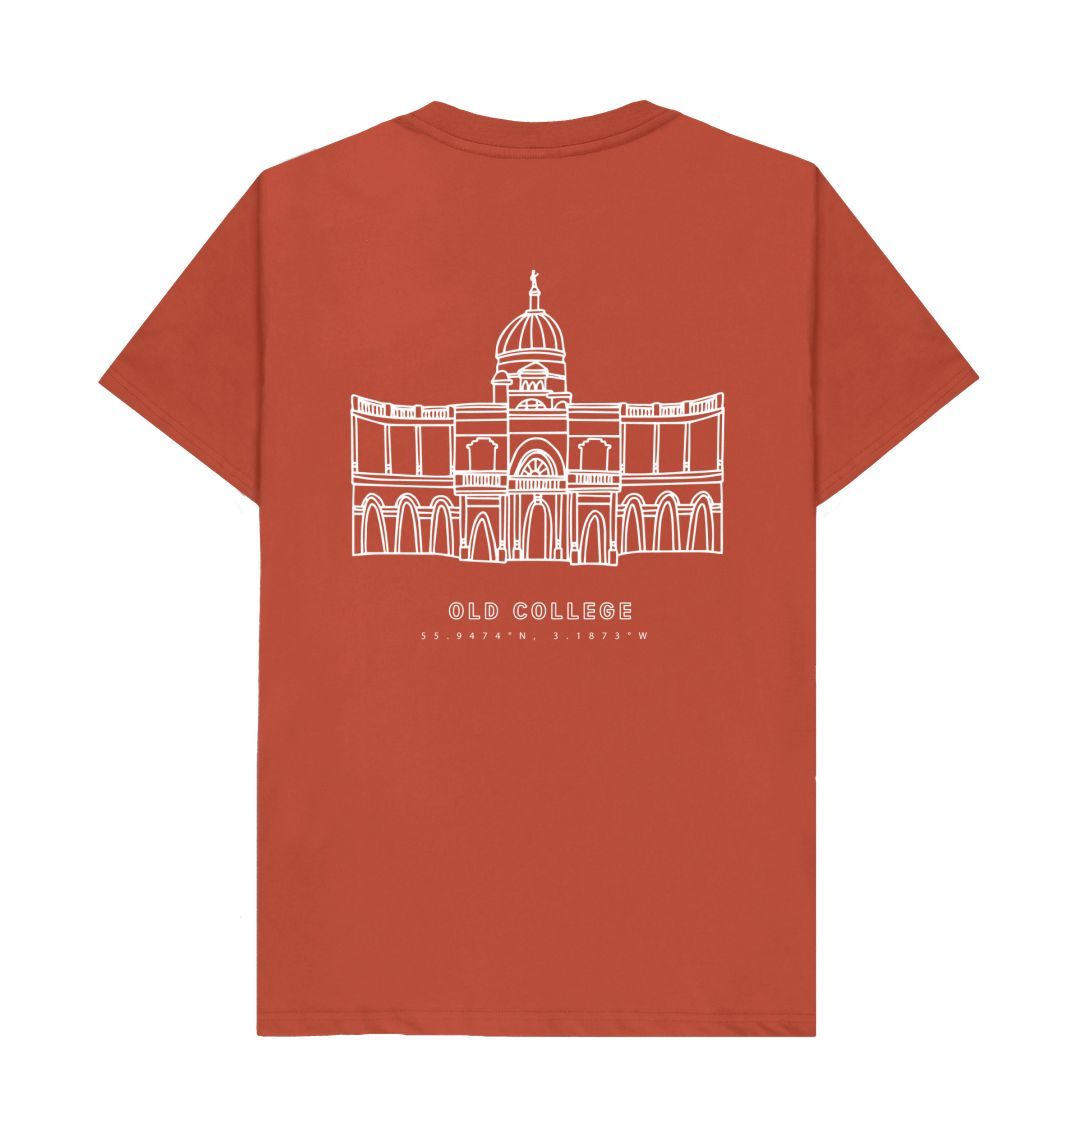 Back of Rust Old College Coordinates Design T-Shirt